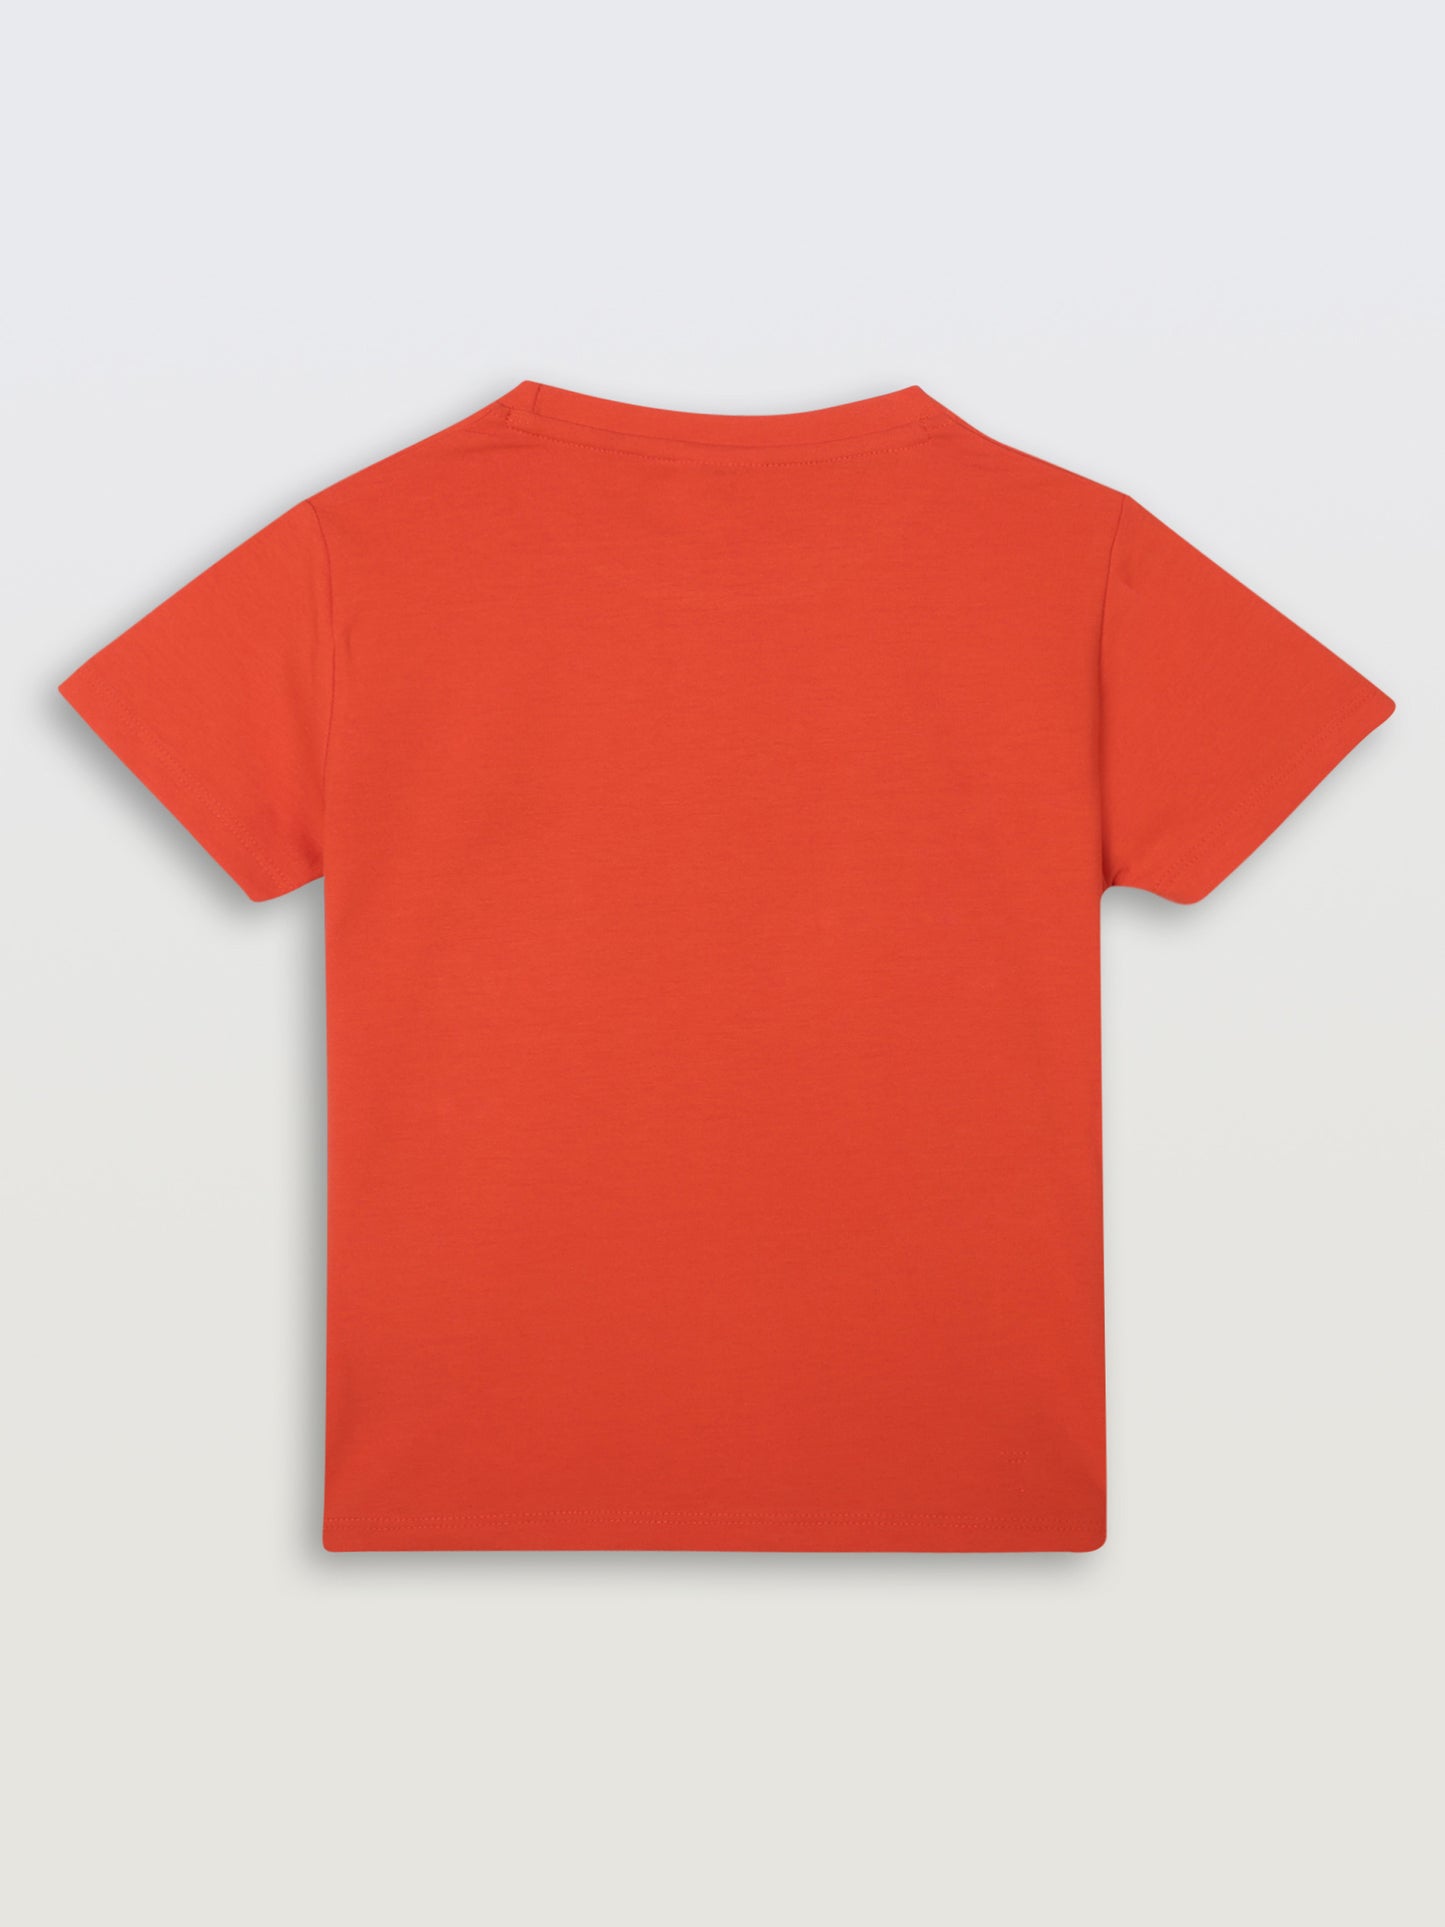 ITS TIME TO CHILL SHORT SLEEVE BOYS T-SHIRT - ORANGE